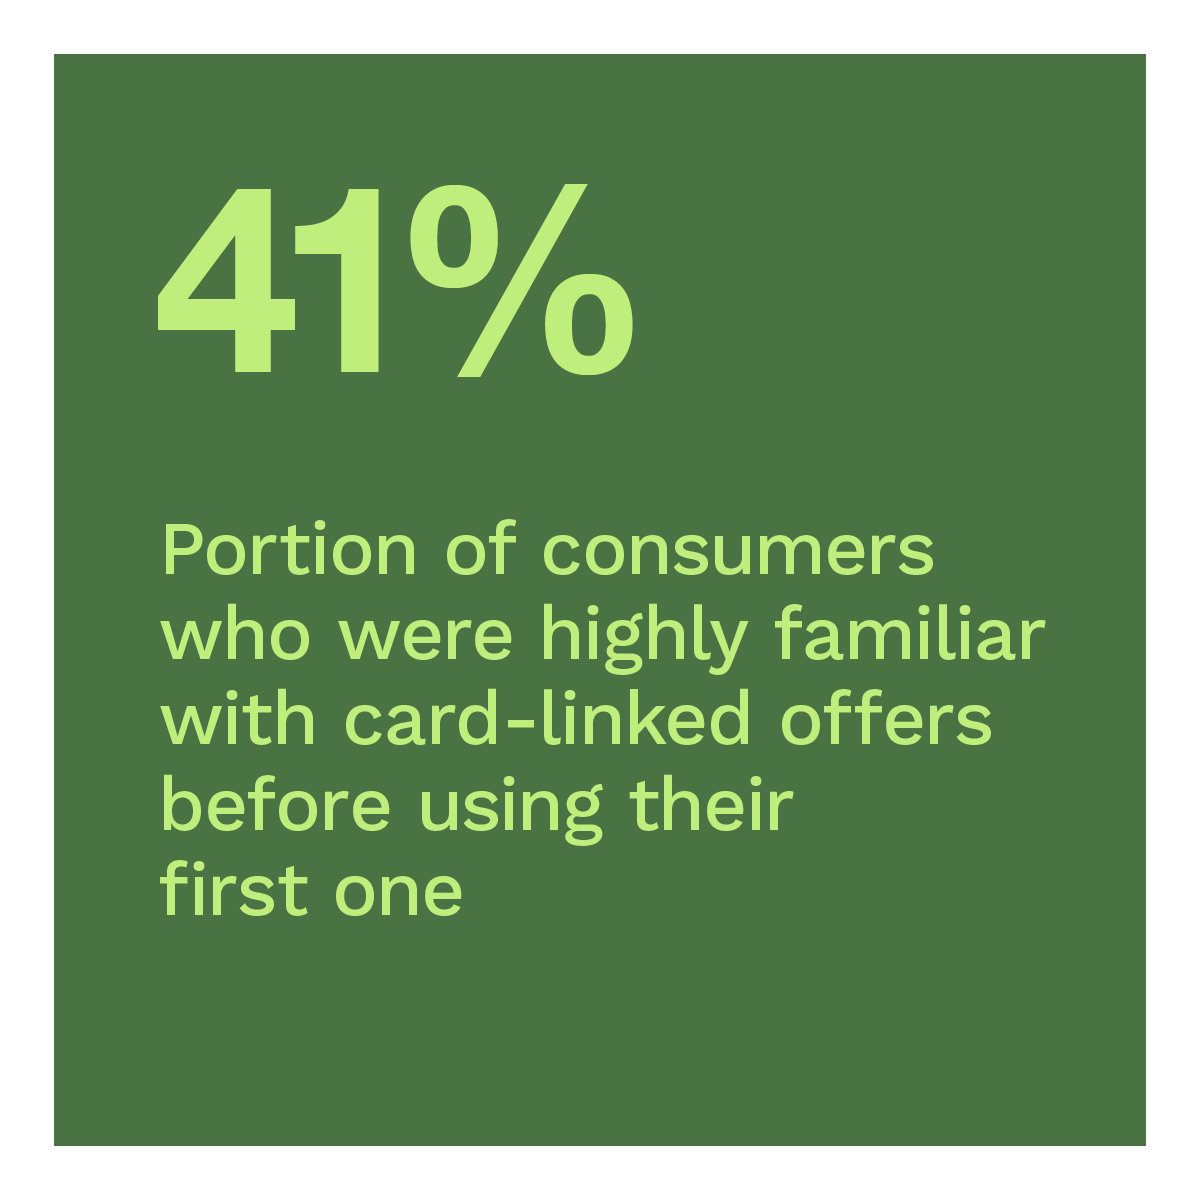  Portion of consumers who were highly familiar with card-linked offers before using their first one